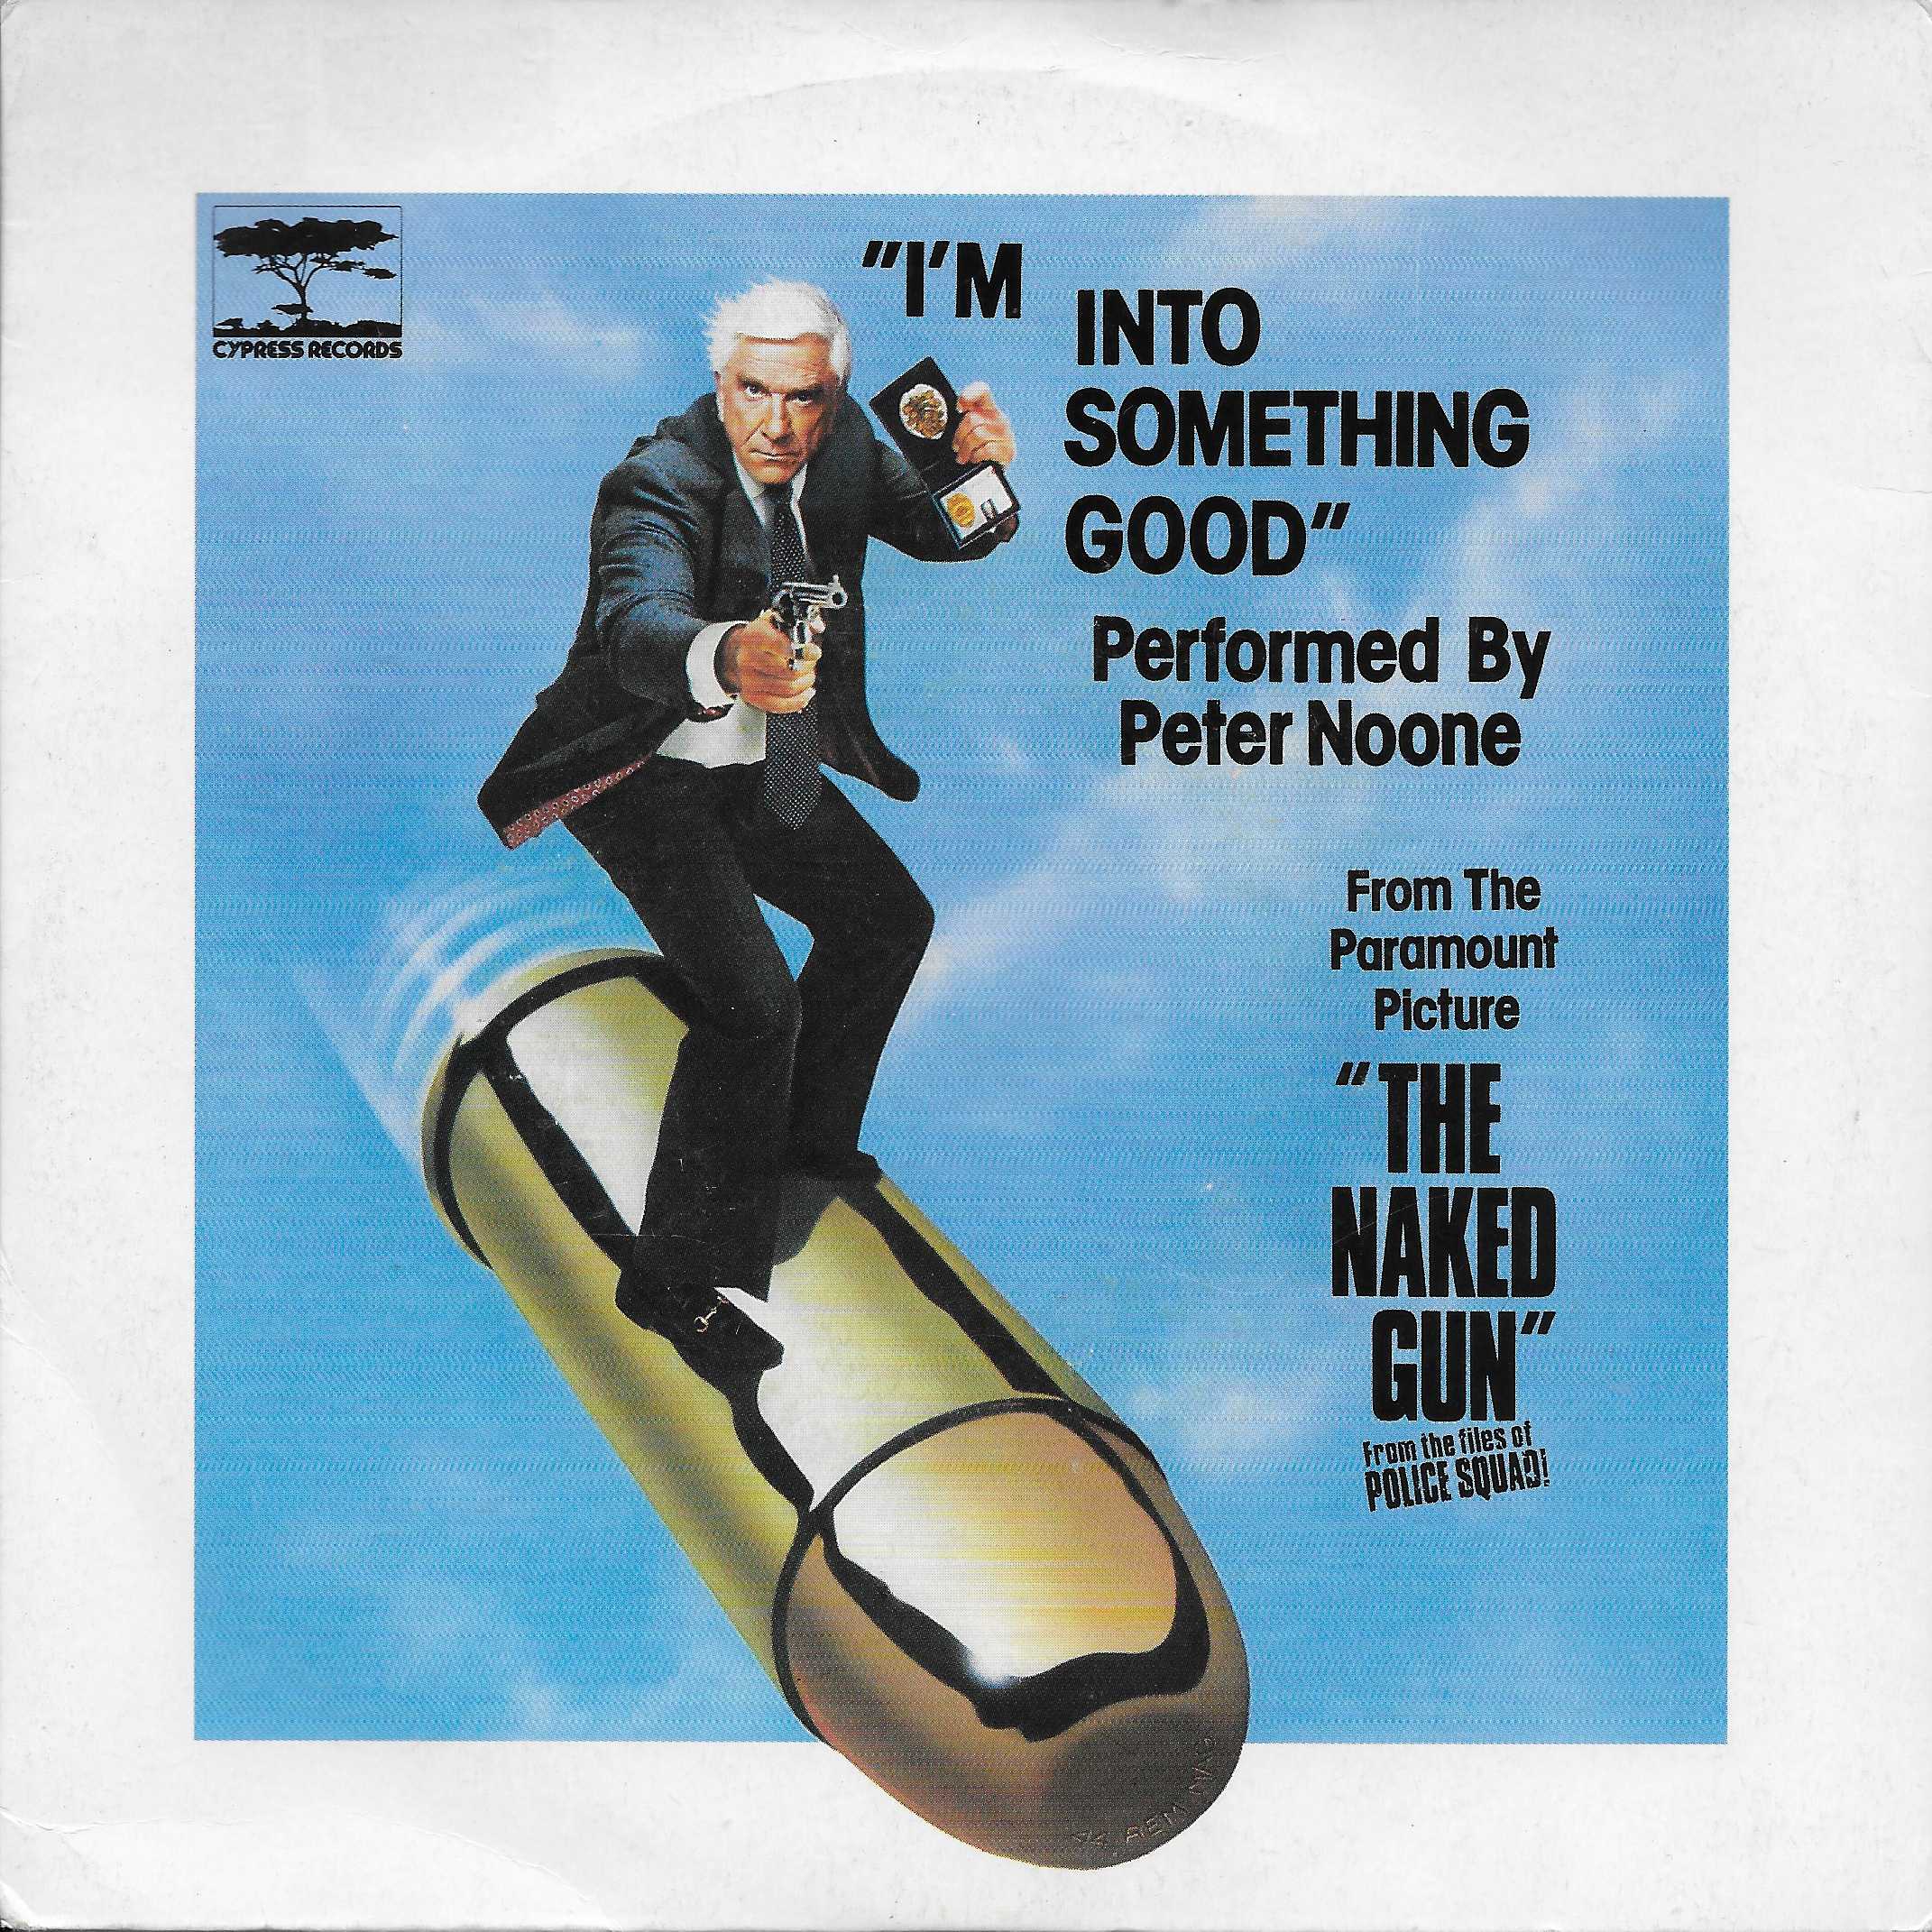 Picture of I'm into something good (The naked gun) by artist Gerry Goffin / Carole King / Peter Noone / Frannie Golde / Ailee Willis from ITV, Channel 4 and Channel 5 singles library